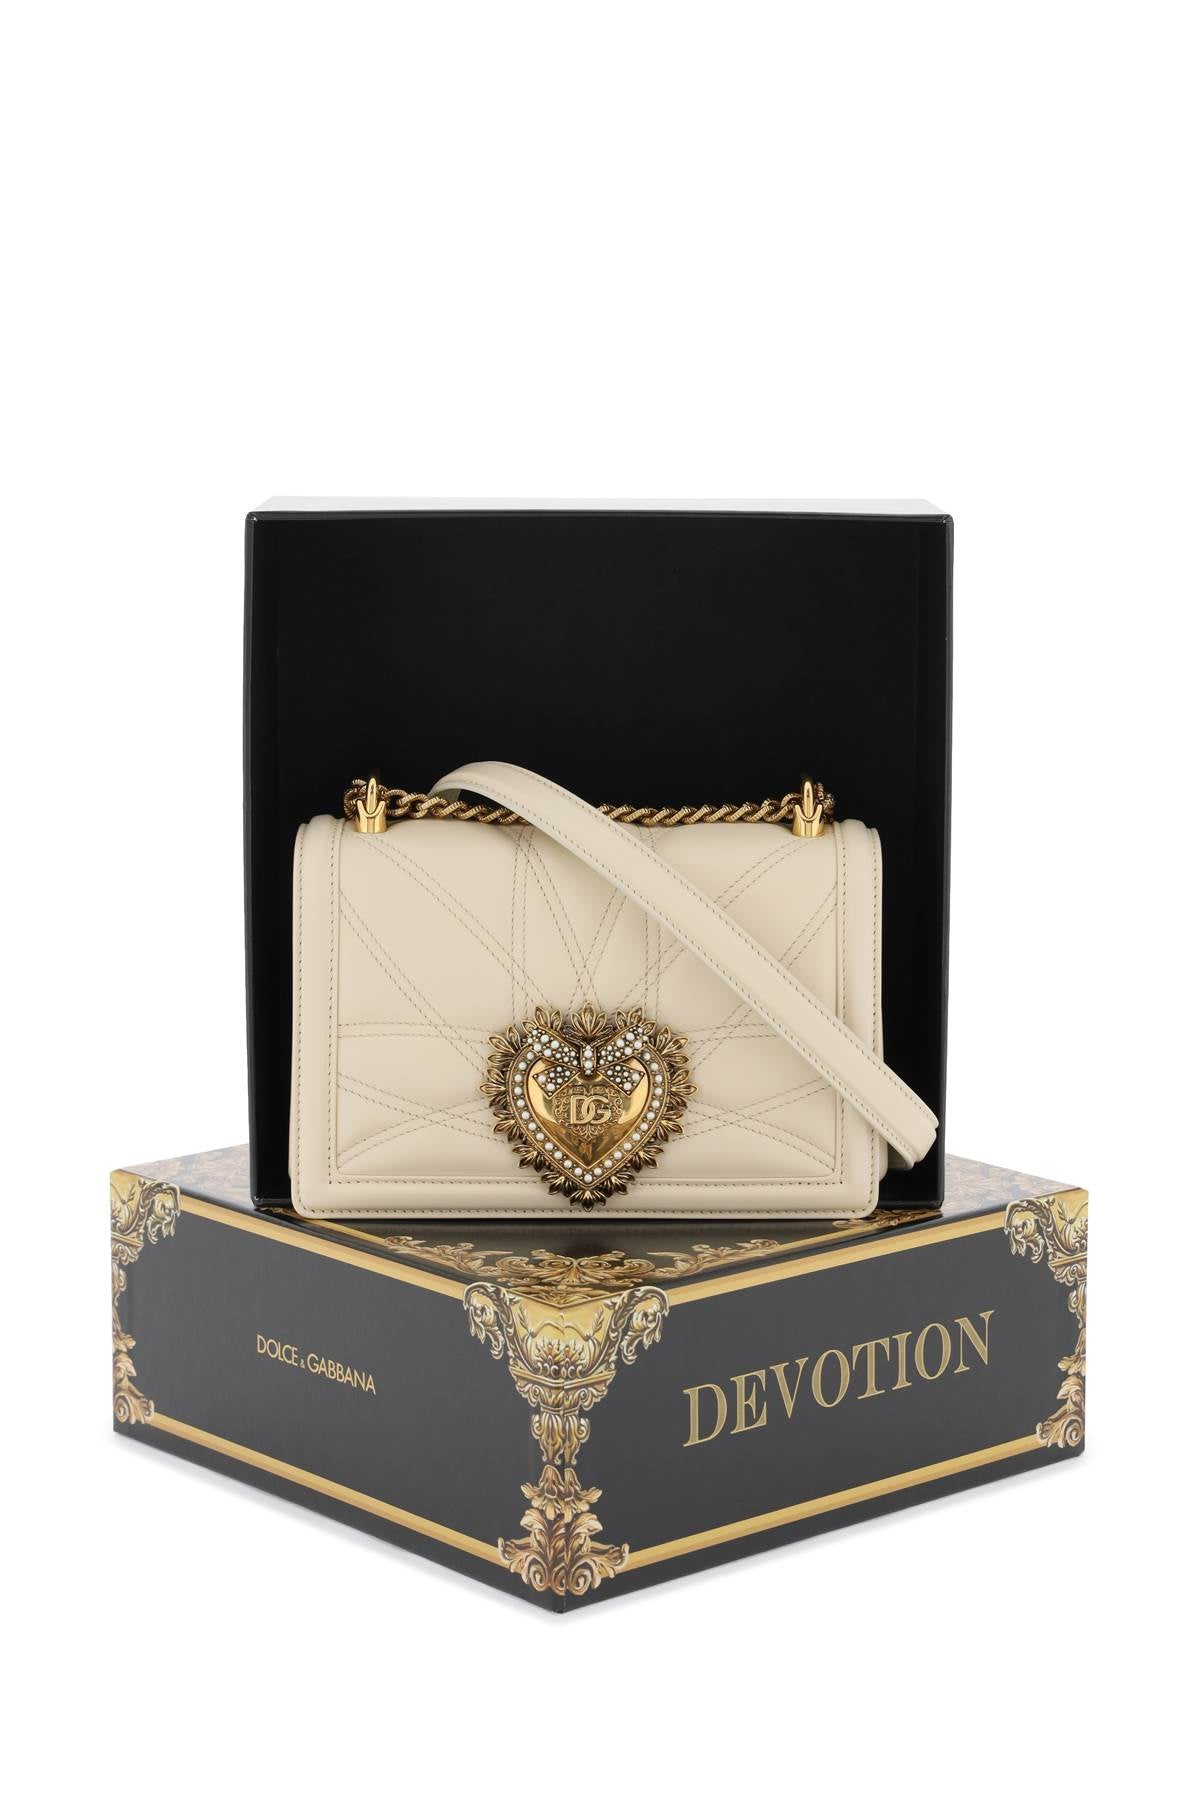 Dolce & gabbana medium devotion bag in quilted nappa leather-2